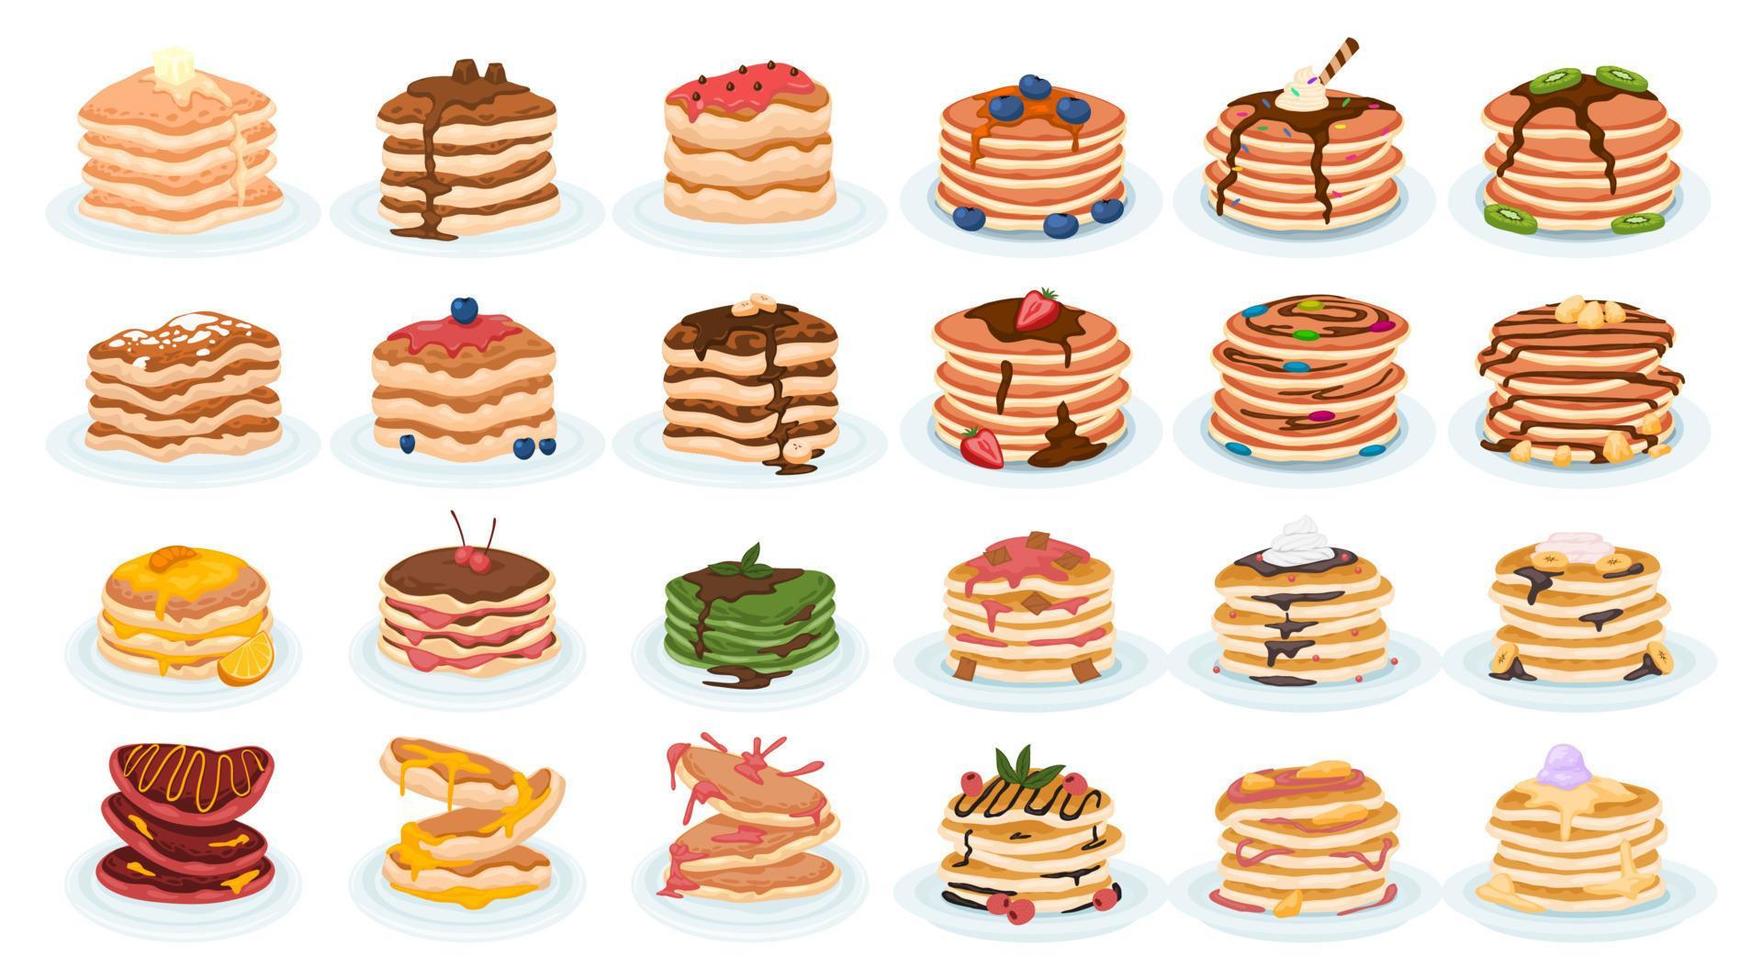 Cartoon pancakes. Stacks of tasty pancakes with, cherry, blueberry, strawberry, butter, chocolate, fruits  Delicious breakfast food vector illustrations. American brunch with berries and nuts